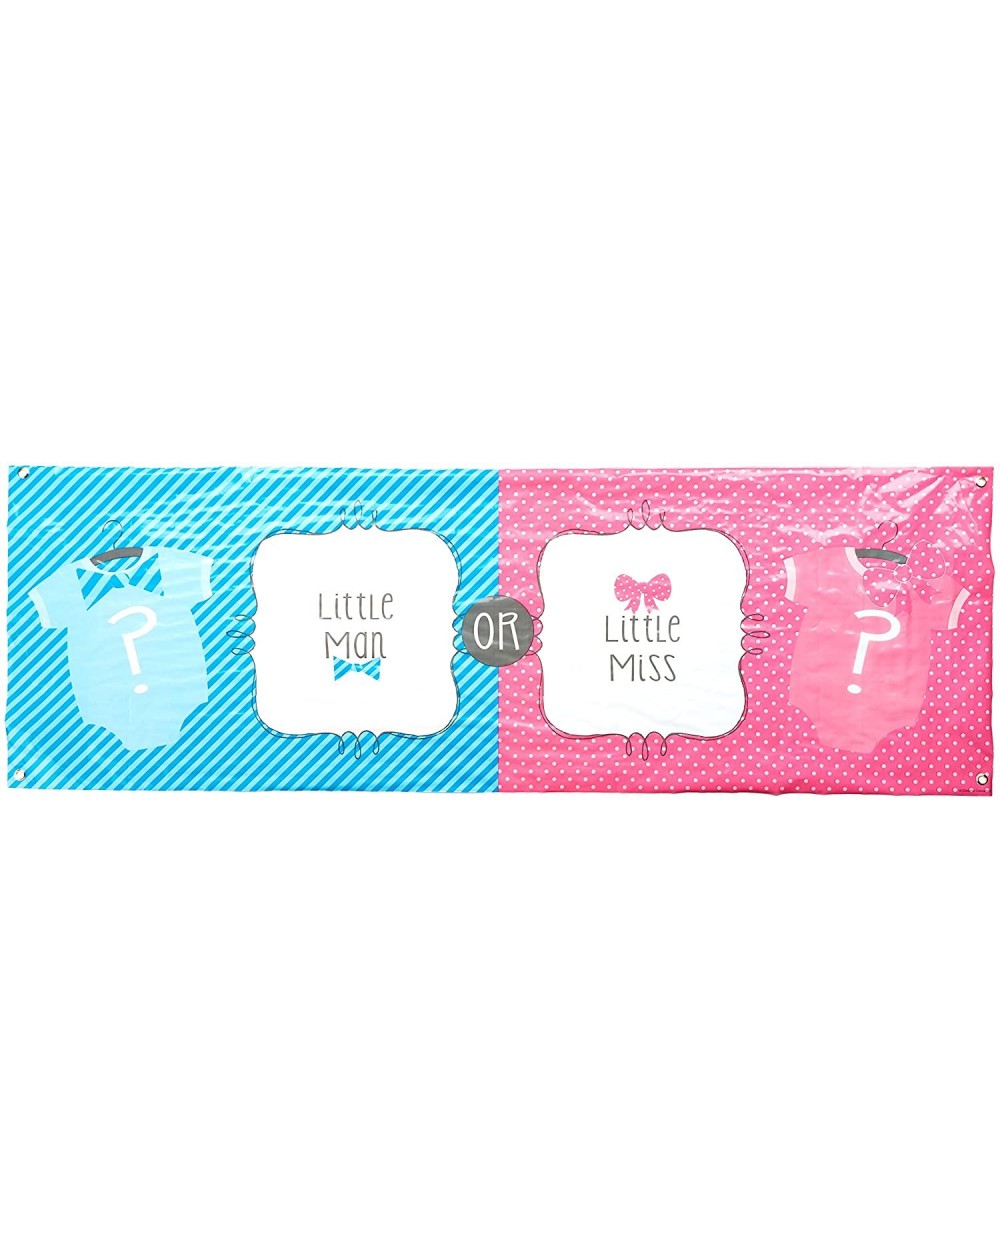 Banners & Garlands Baby Shower/Gender Reveal Party Banner Bow Or Bowtie - CQ11J8GGD19 $11.50